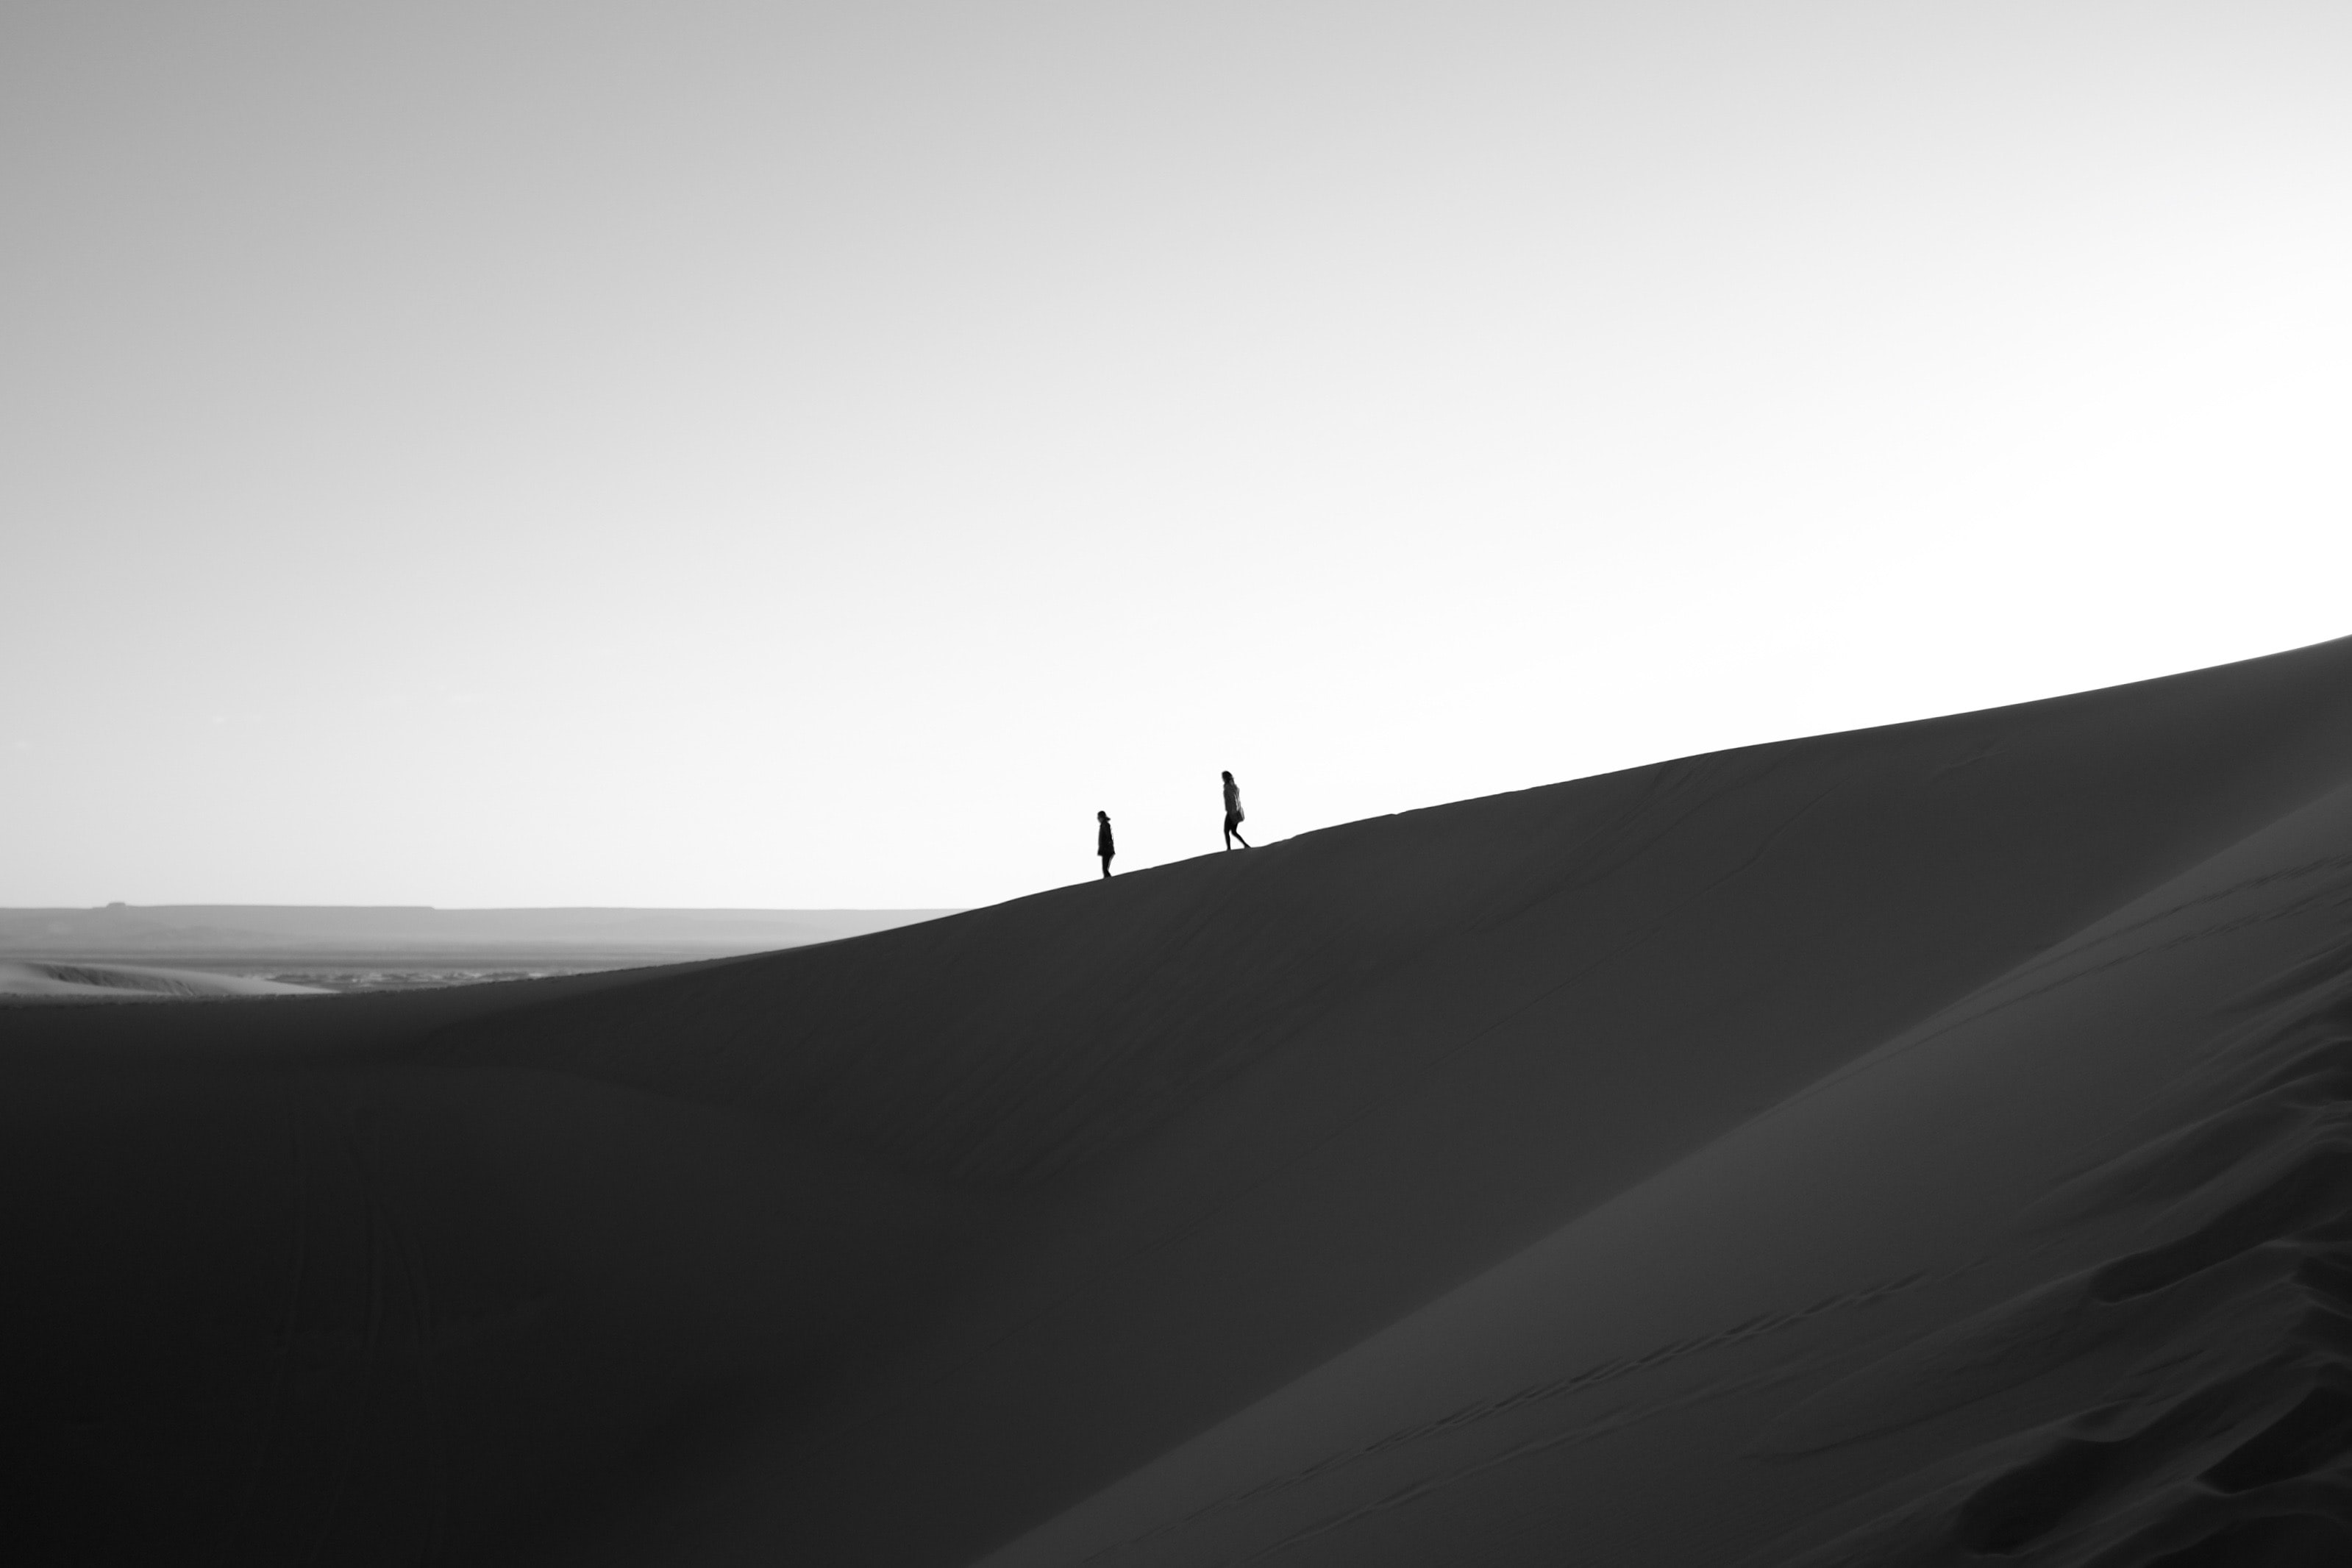 silhouette of two person walking on desert